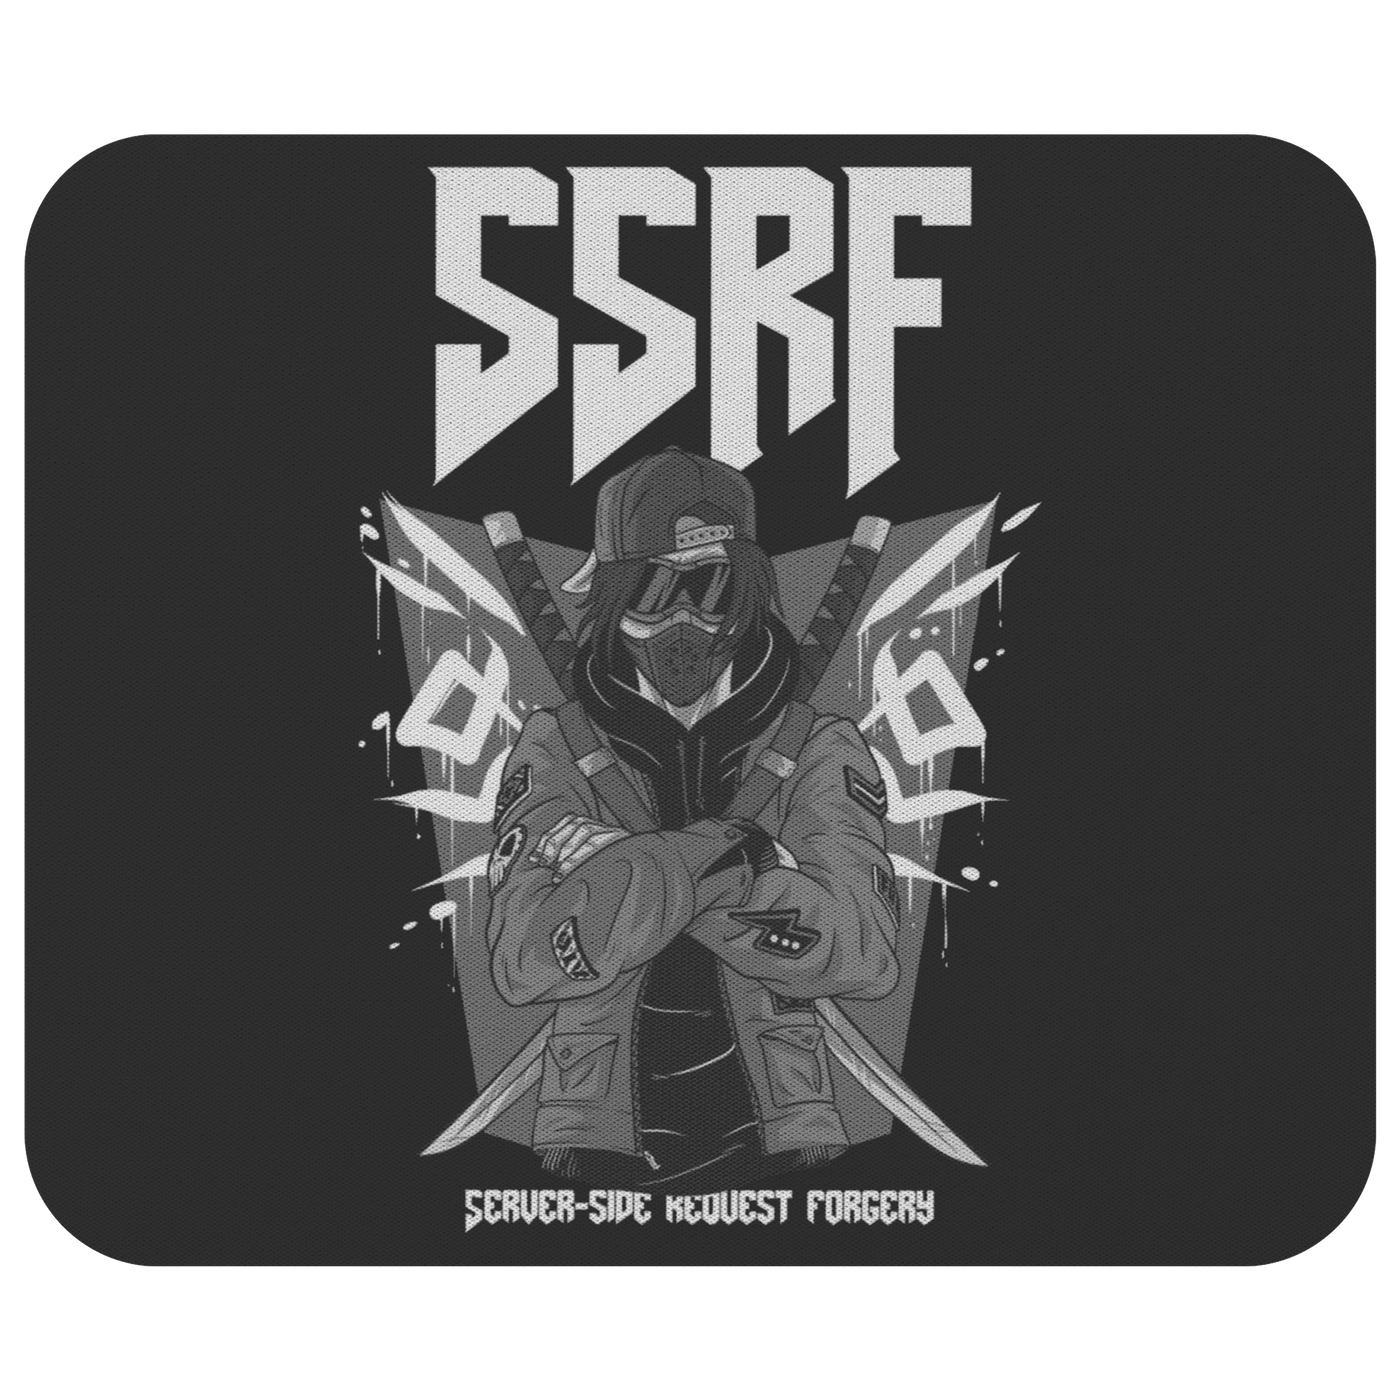 SSRF - Server-side request forgery - Mousepad